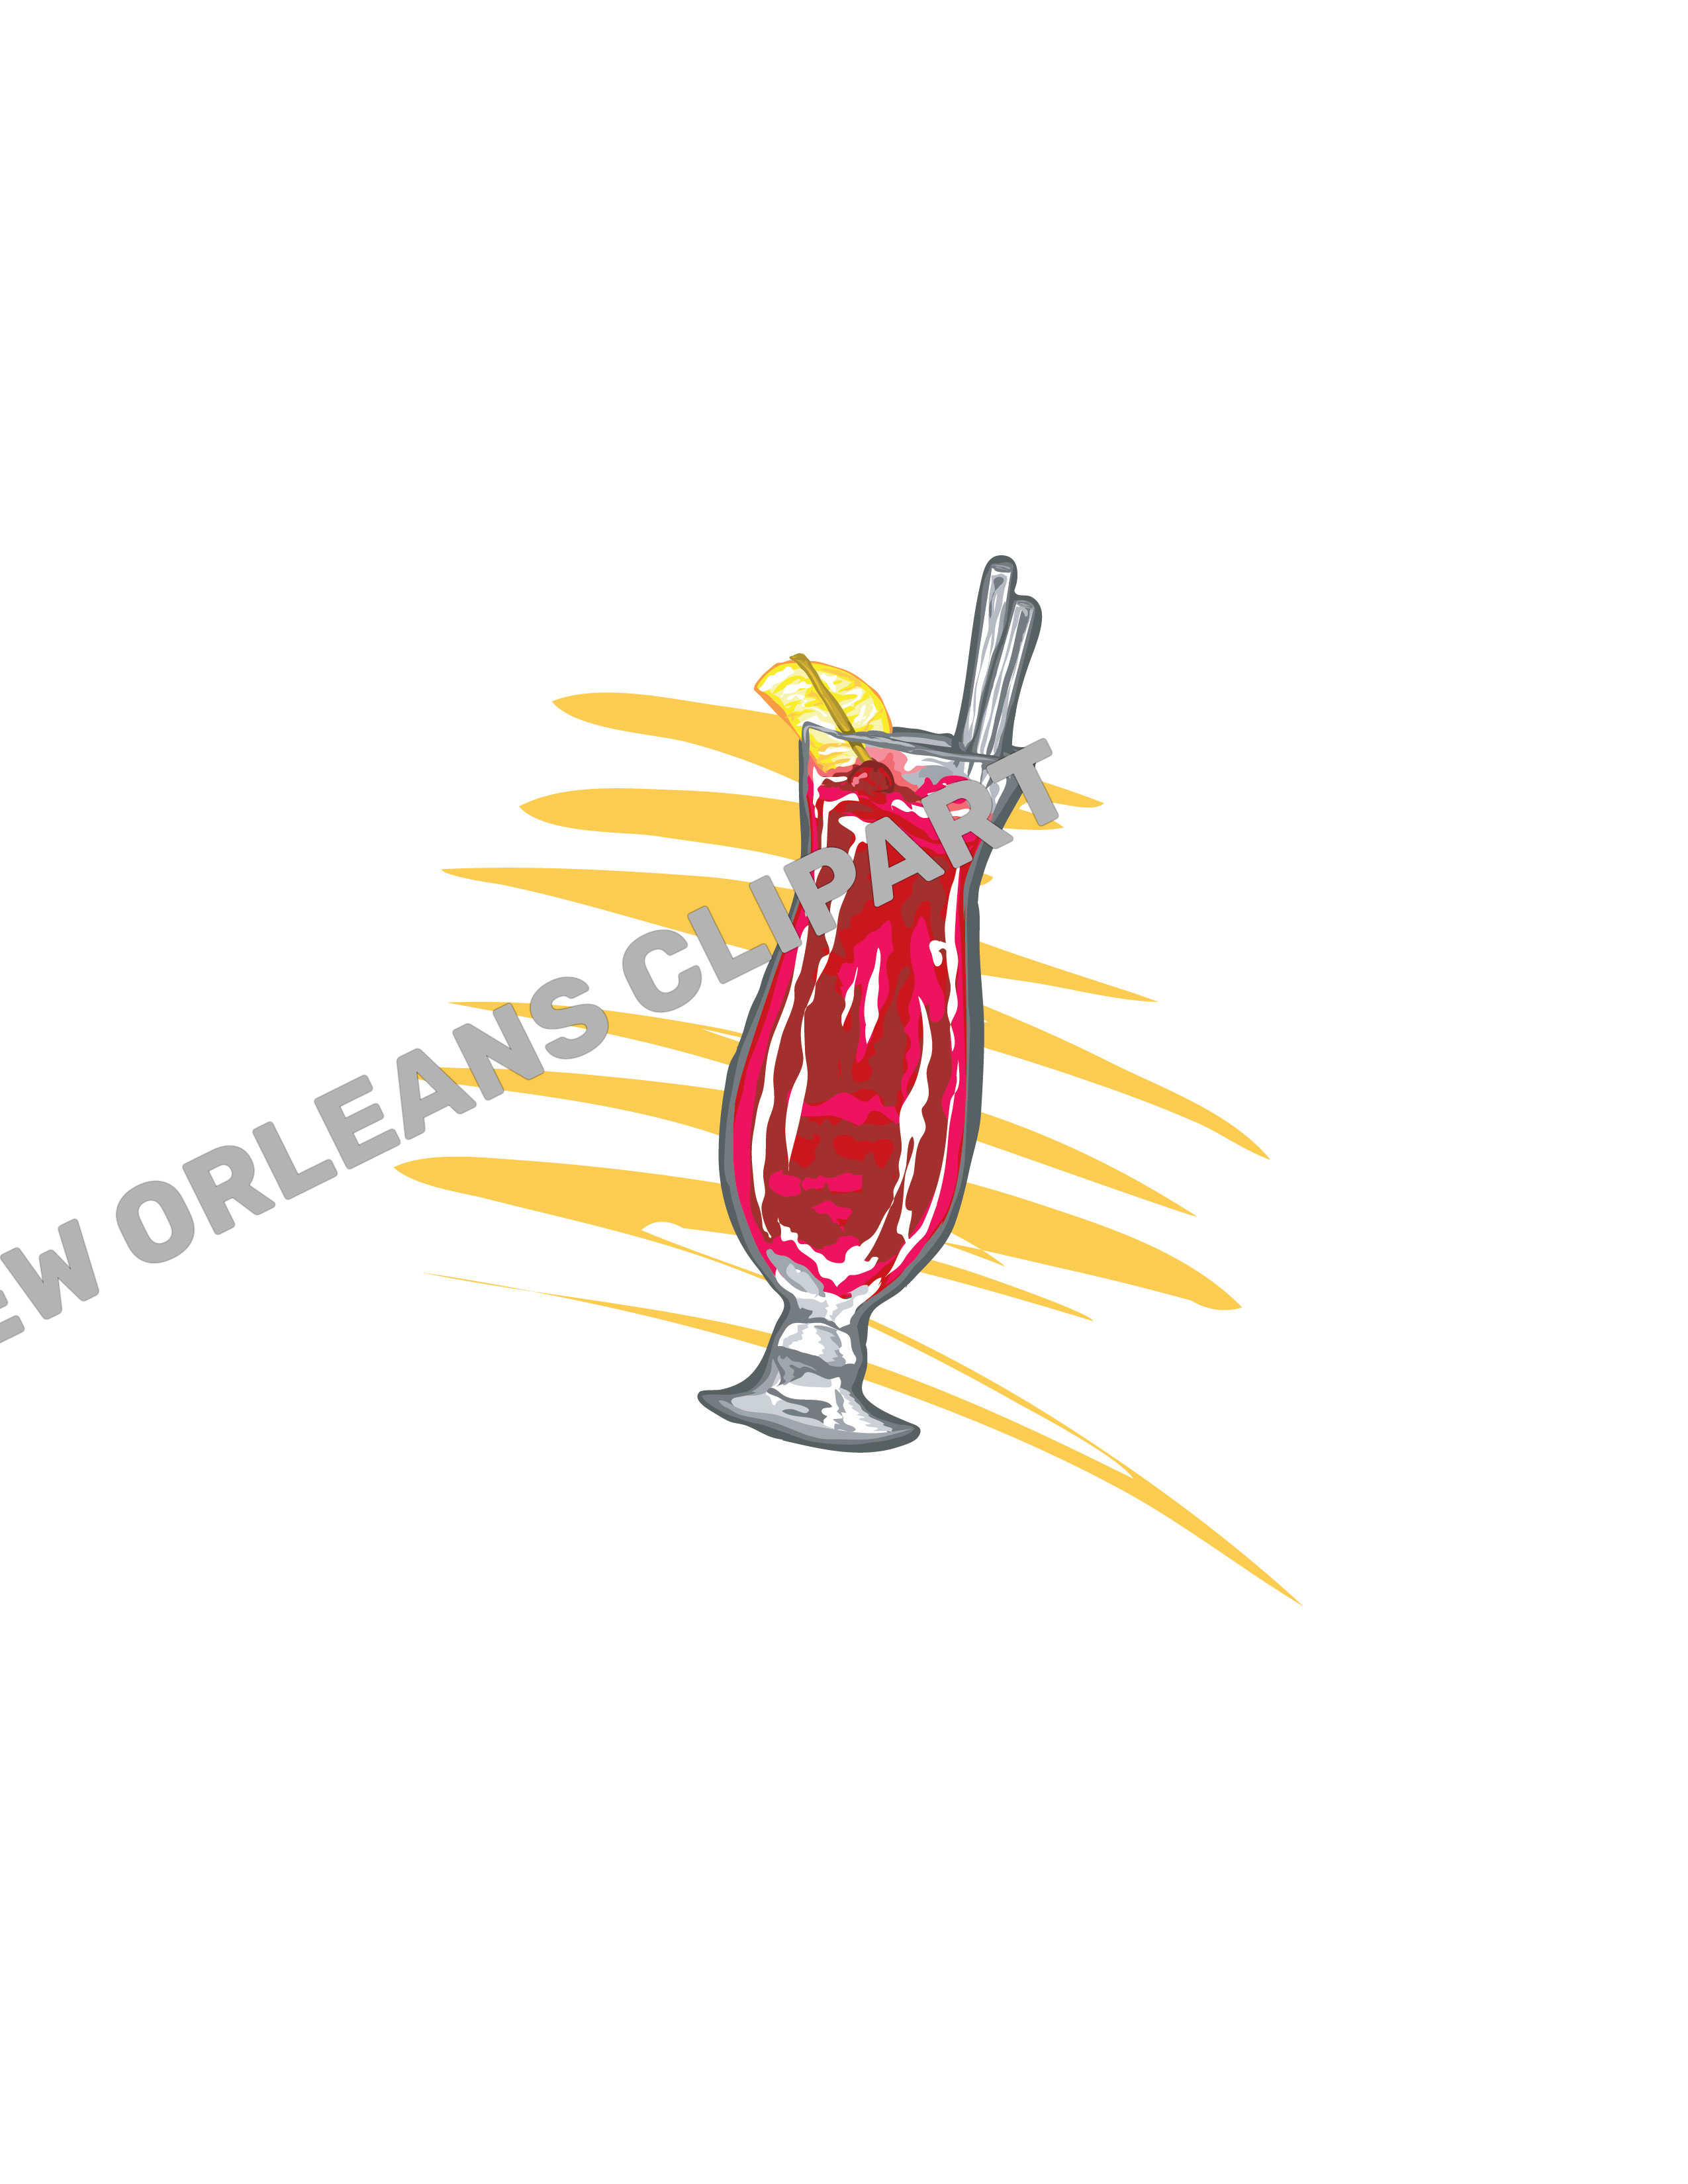 New orleans drink clip. Hurricane clipart abstract